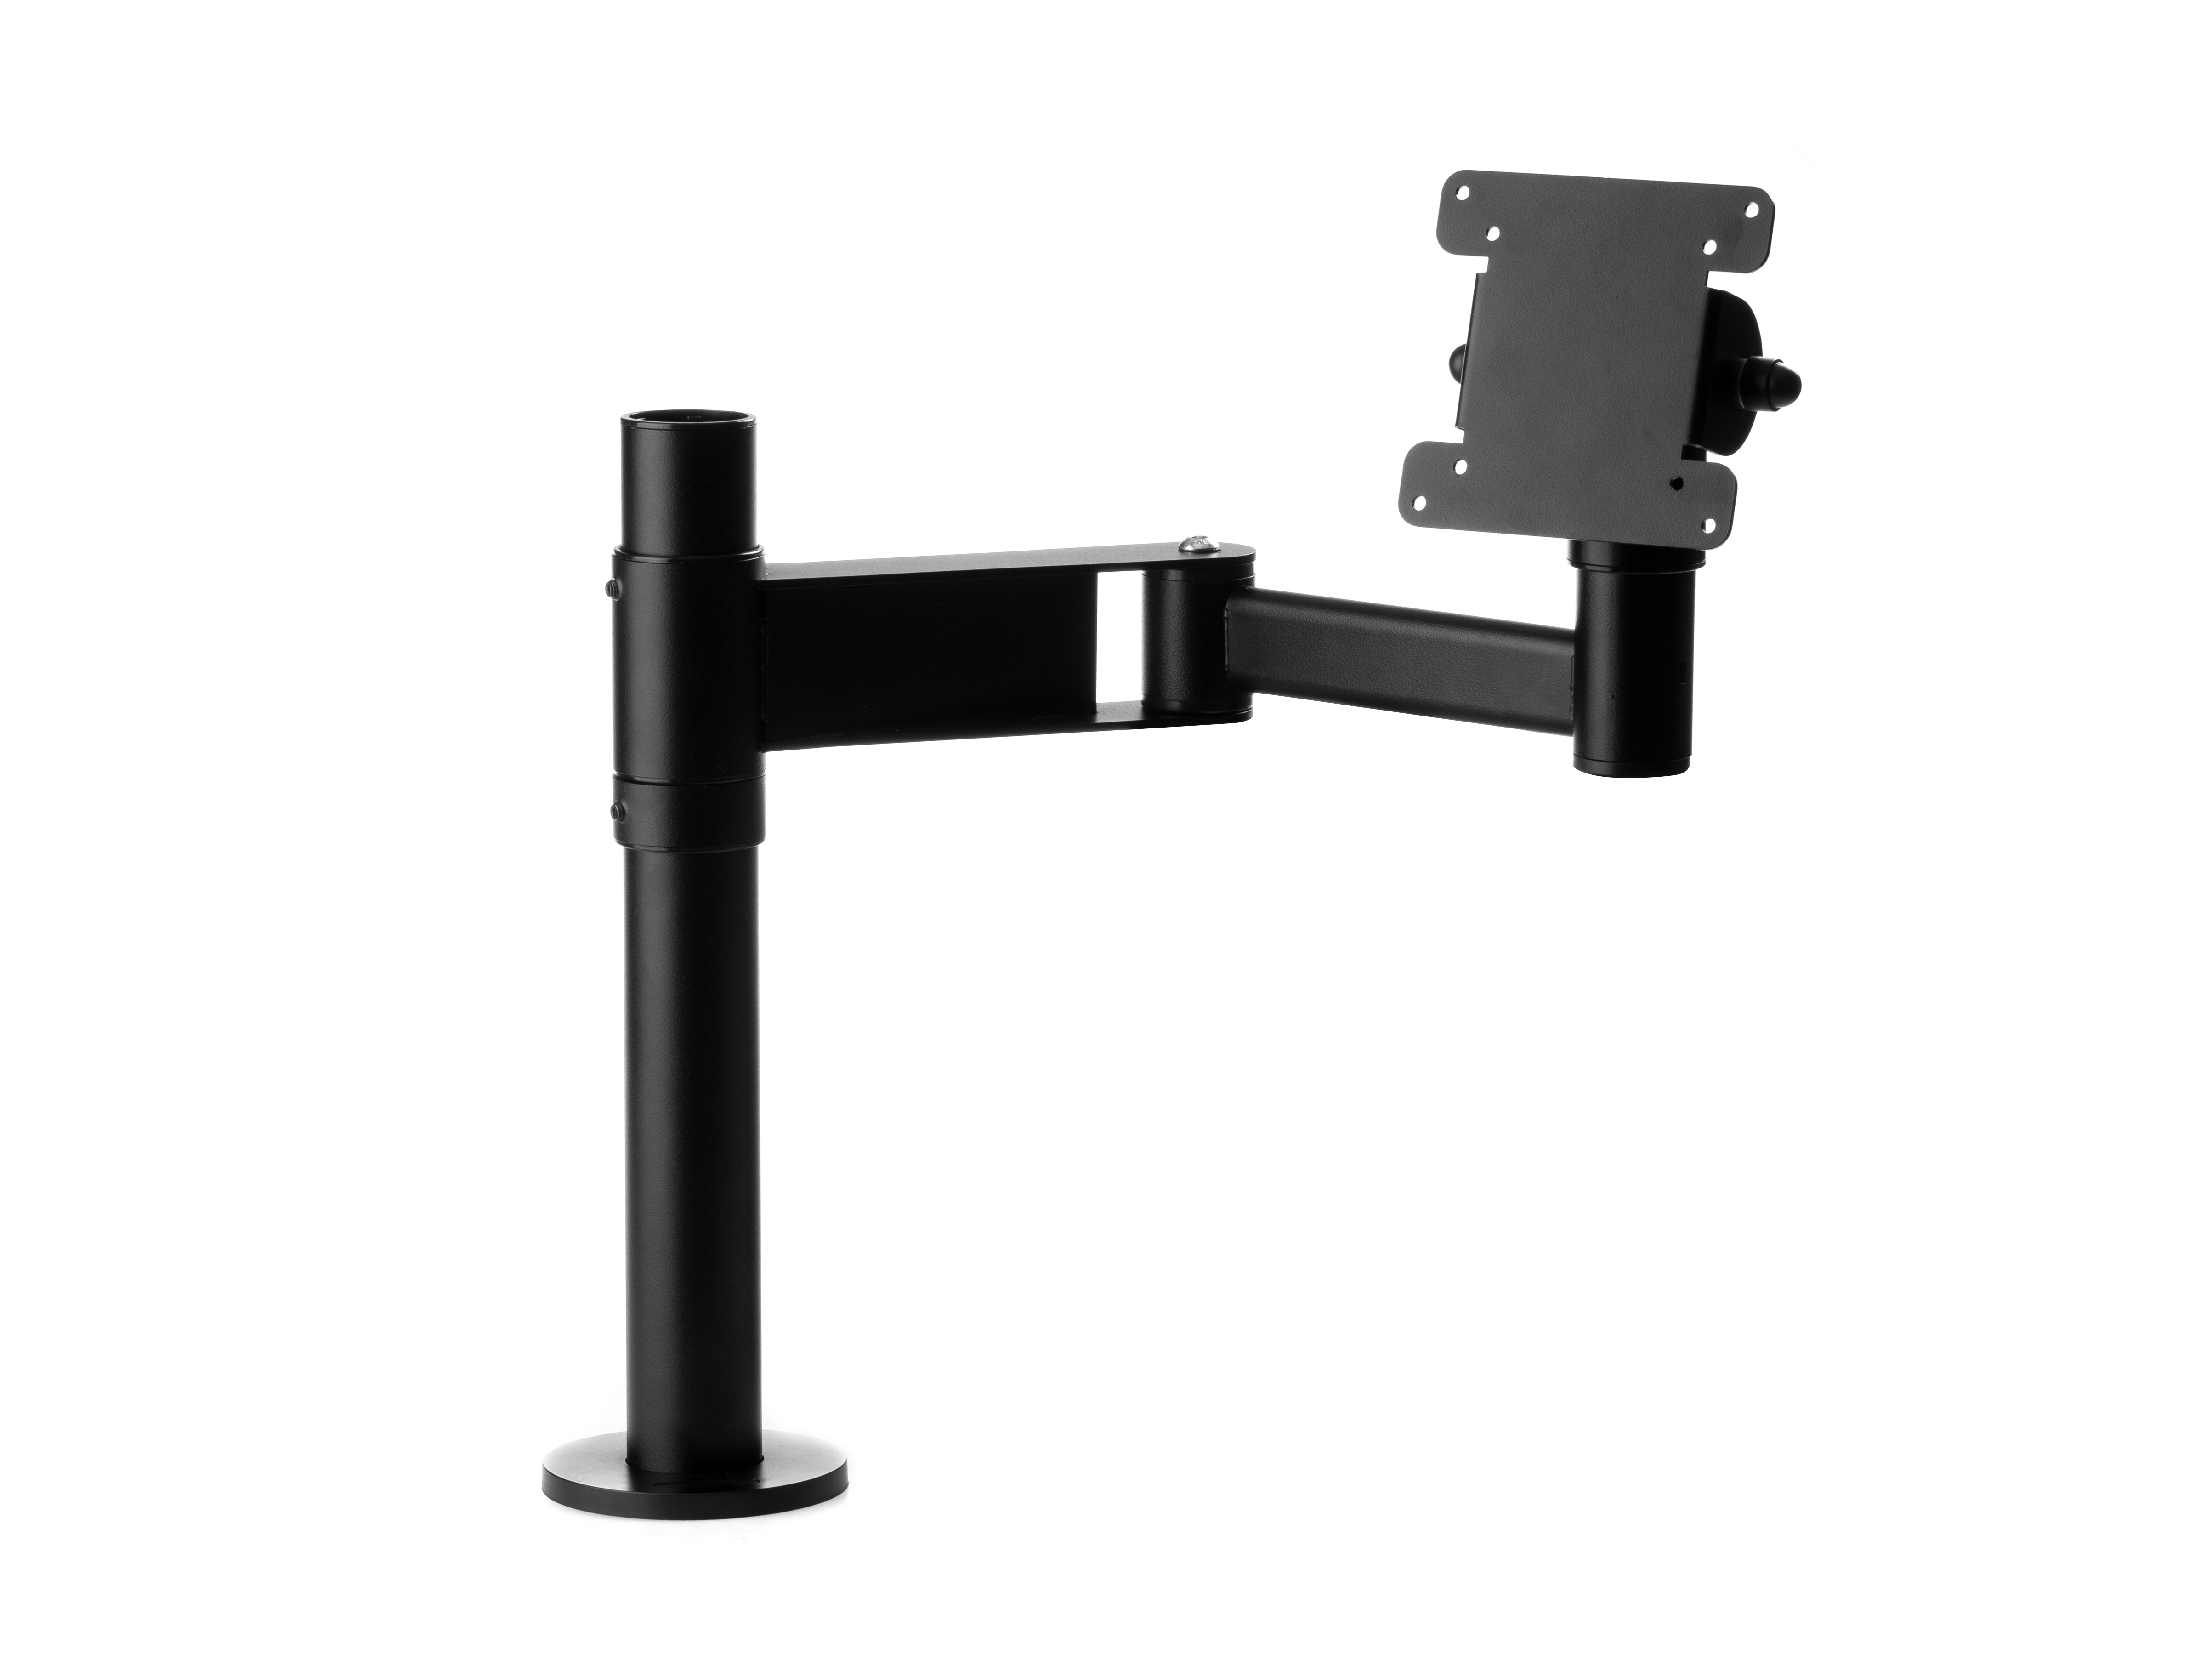 POS solution with Swivel arm